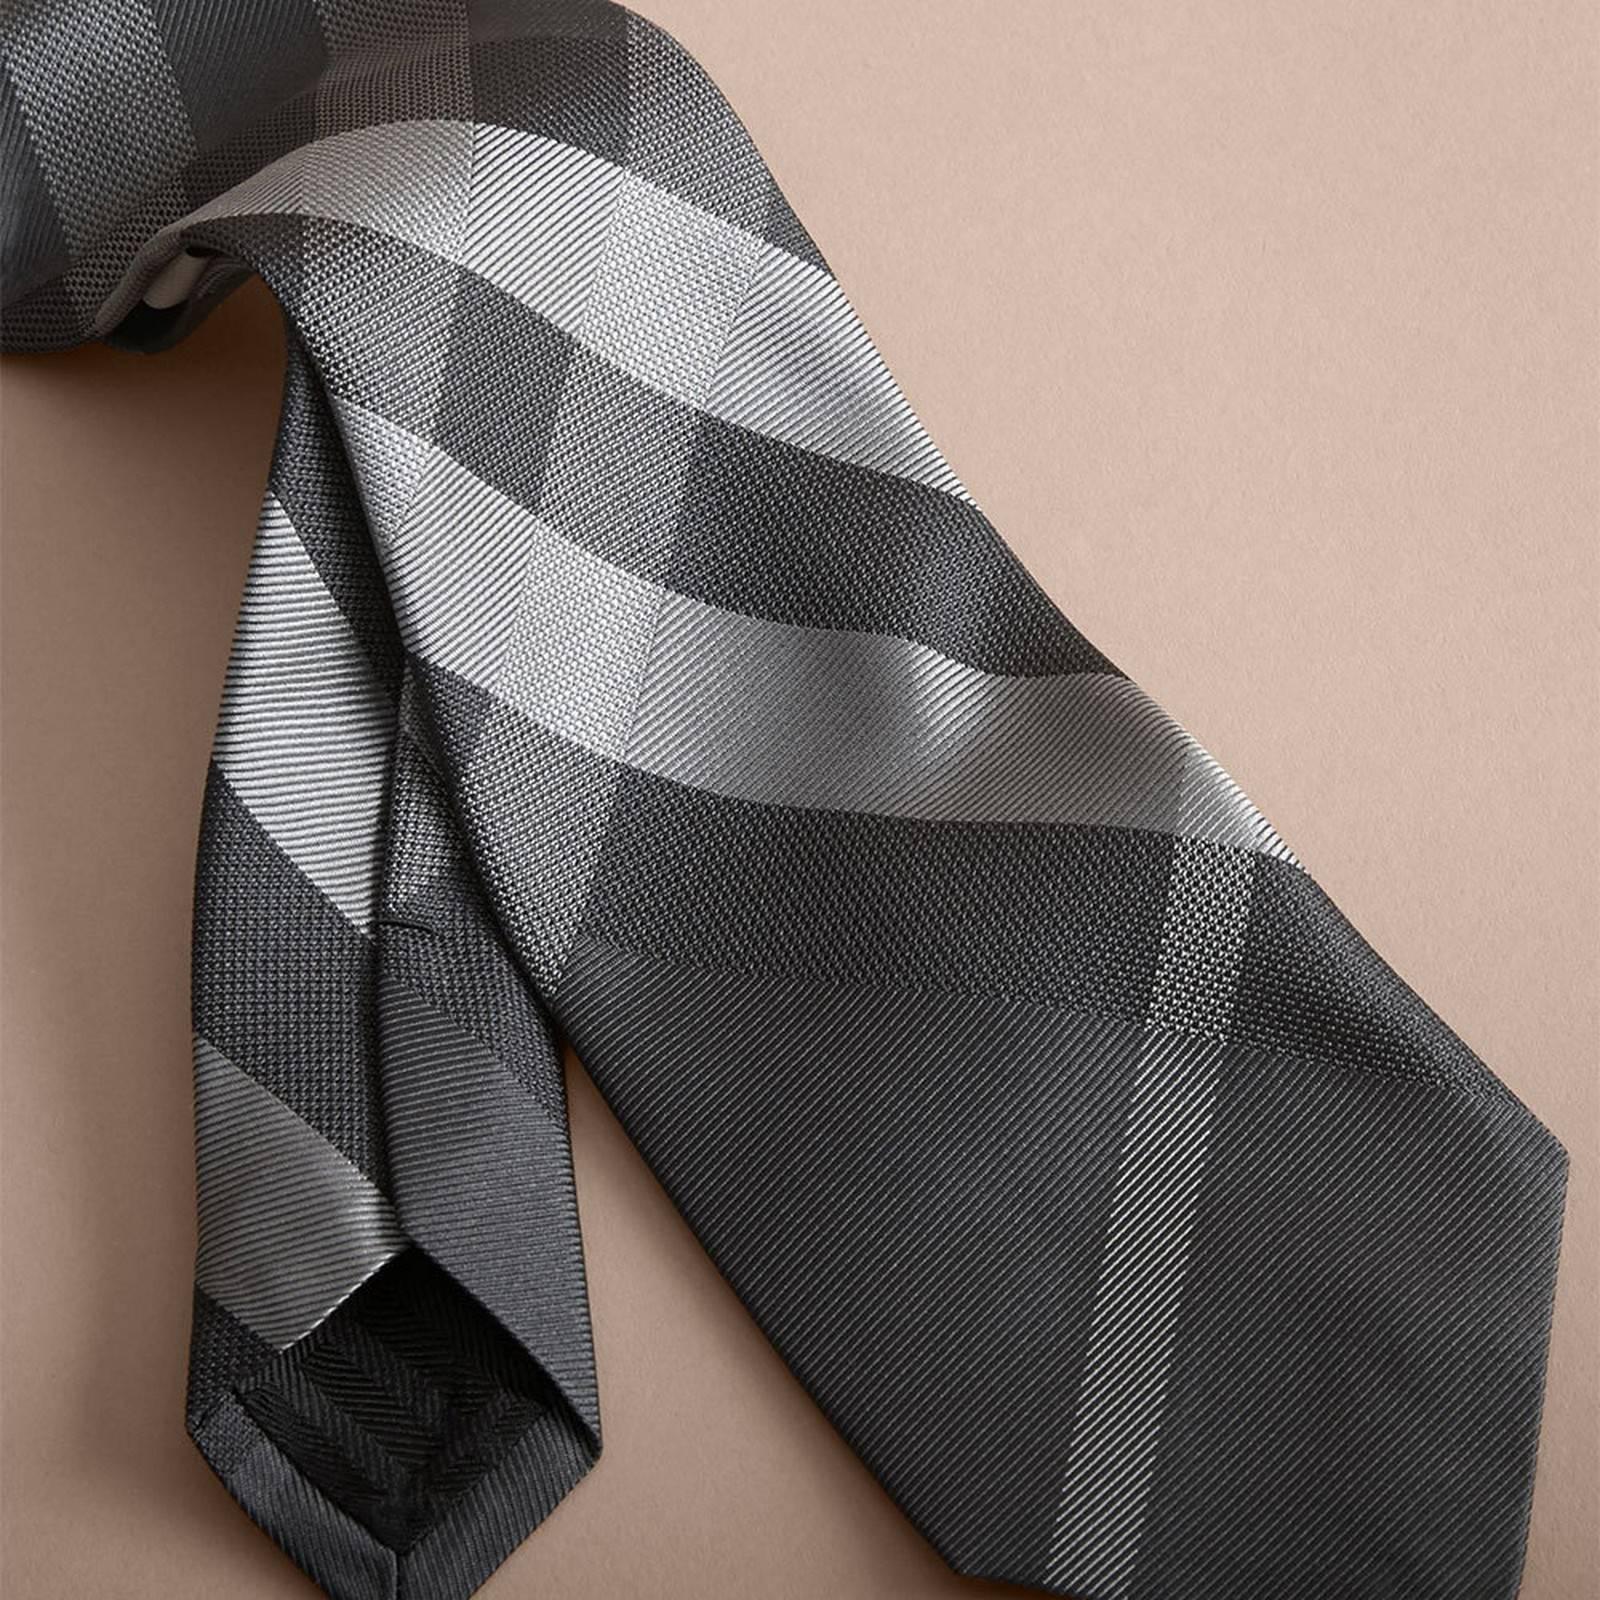 Burberry Modern Cut Check Silk Dark Charcoal Tie - Size: 3” (8cm)
Brand new.
100% Silk.
Size: 3” (8cm)
Made in Italy.